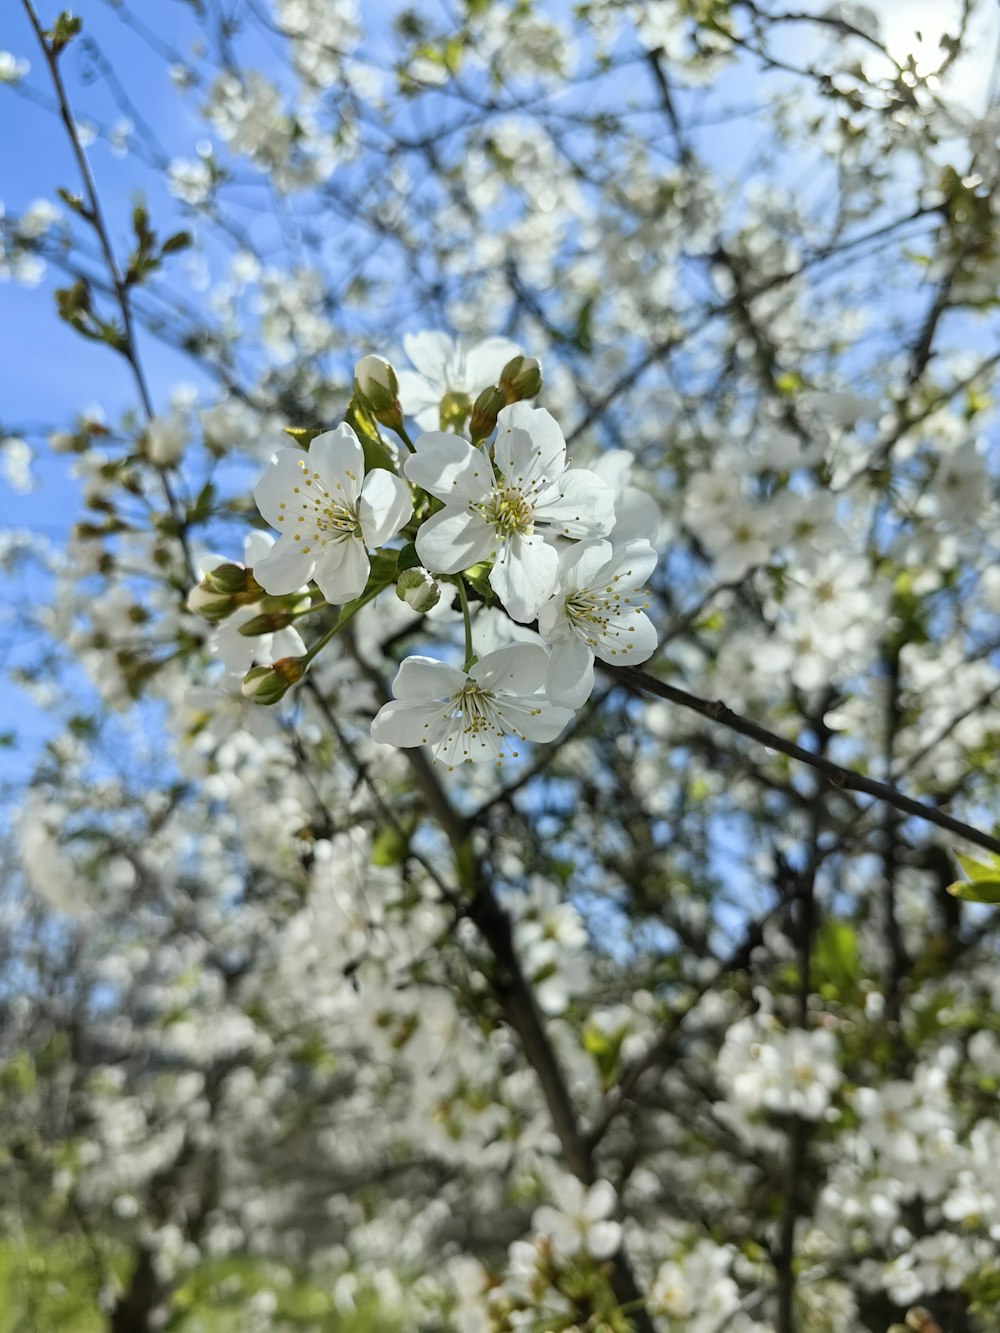 a tree with white flowers in the foreground and a blue sky in the background